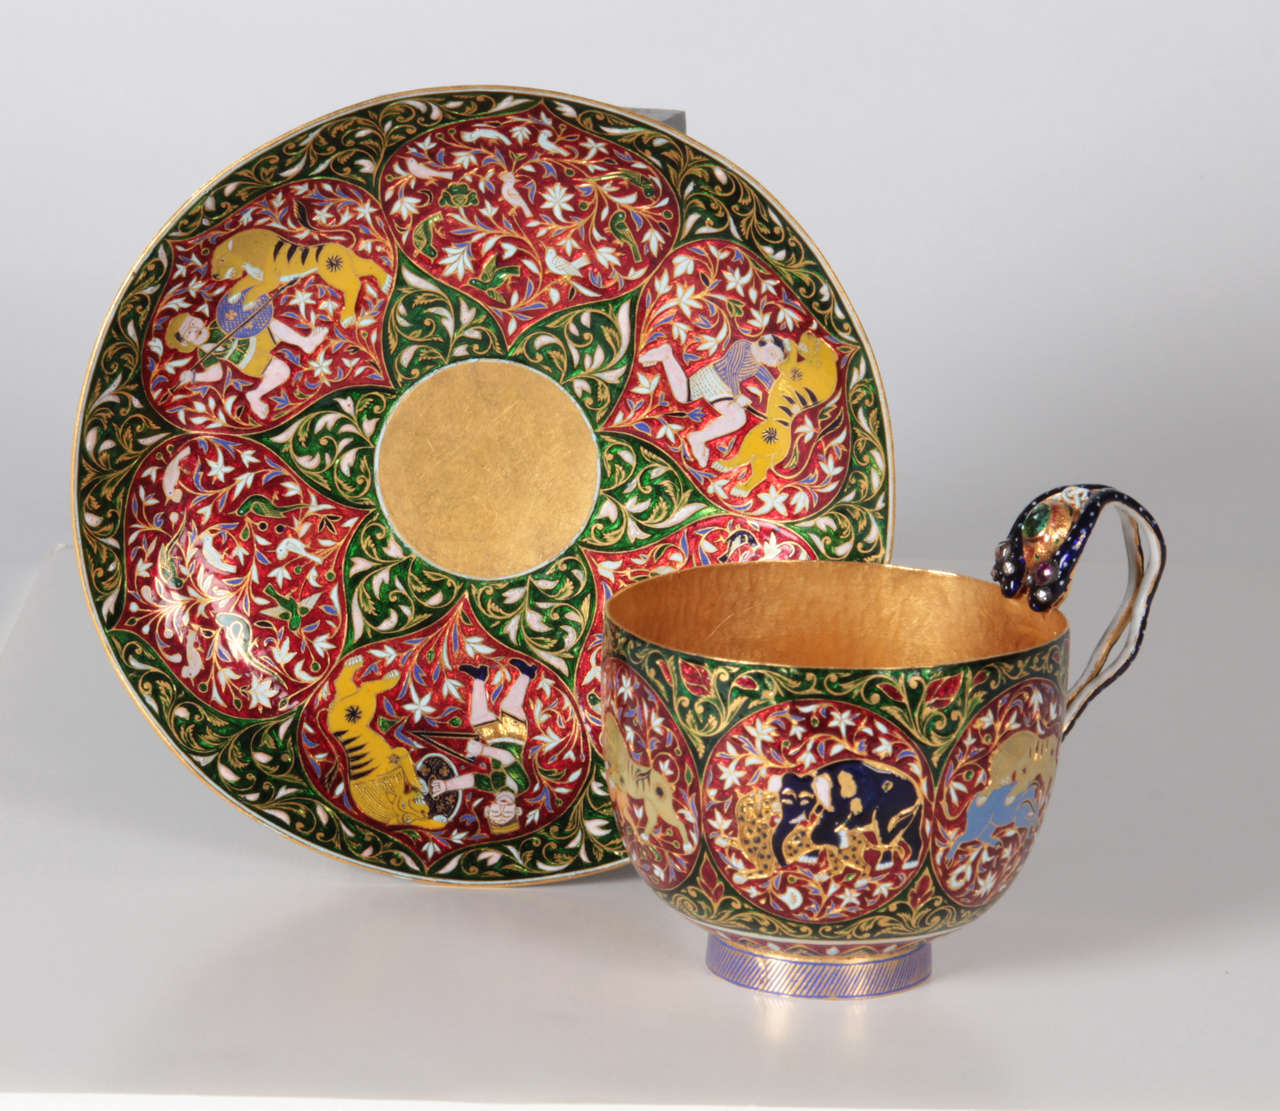 Jaipur Enameled and Gem Set Rare Solid Gold Cup and Saucer mid 19th Century For Sale 4